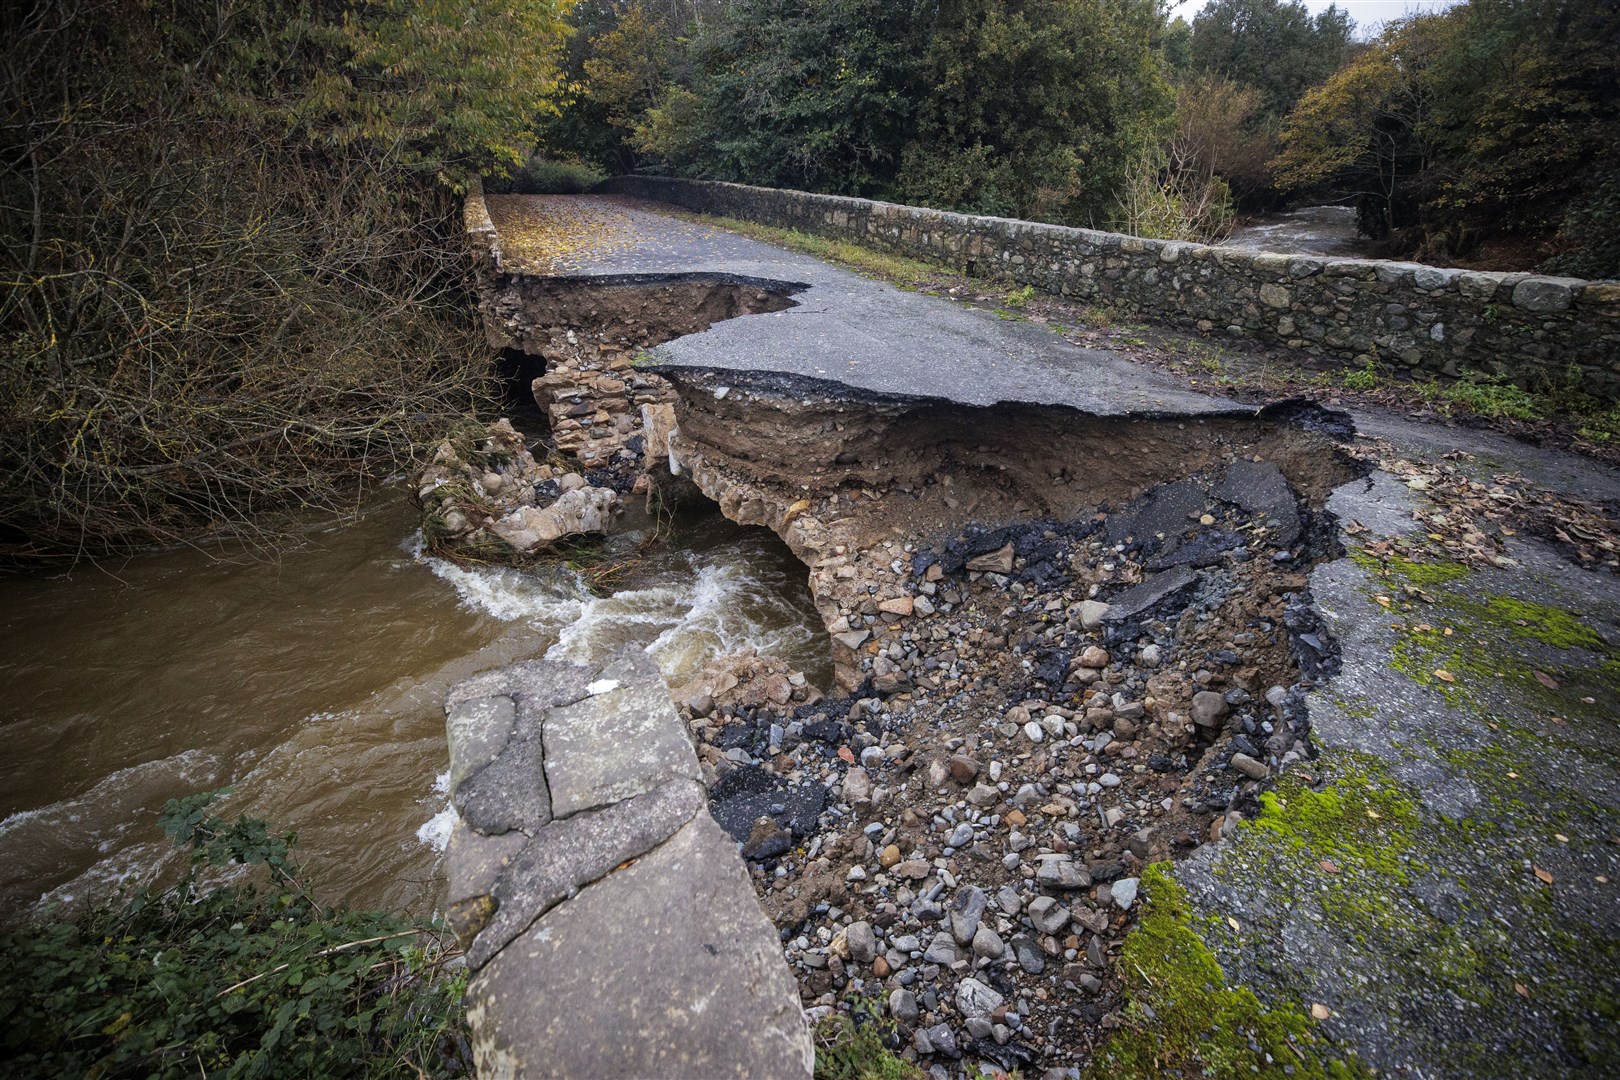 River Big Bridge outside Carlingford, Co Louth, has partly collapsed amid heavy rain and flooding (Liam McBurney/PA)